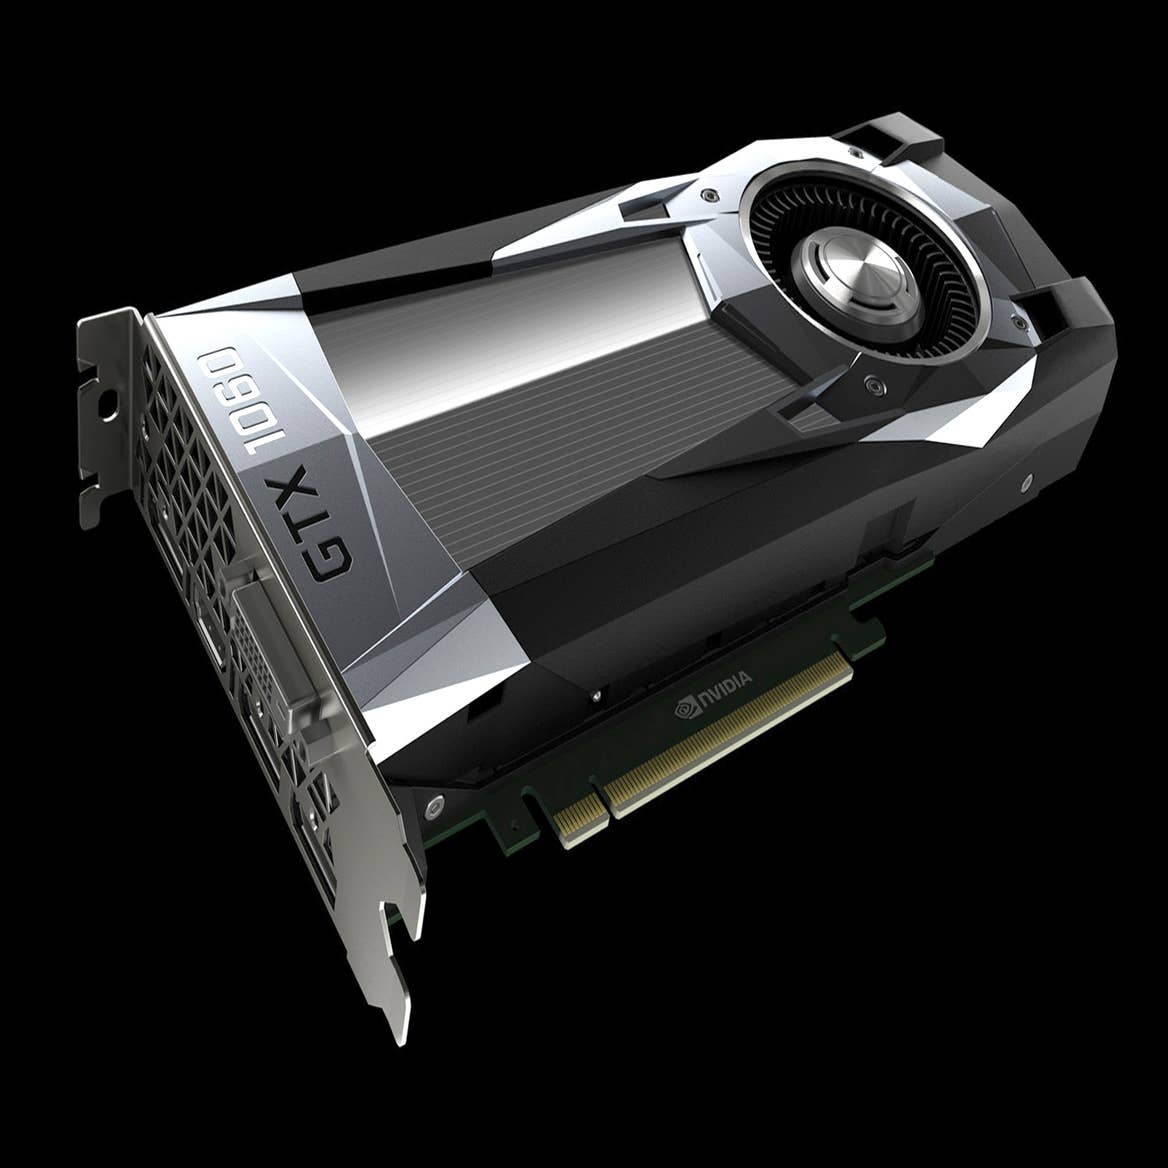 Nvidia GeForce GTX 1060 review